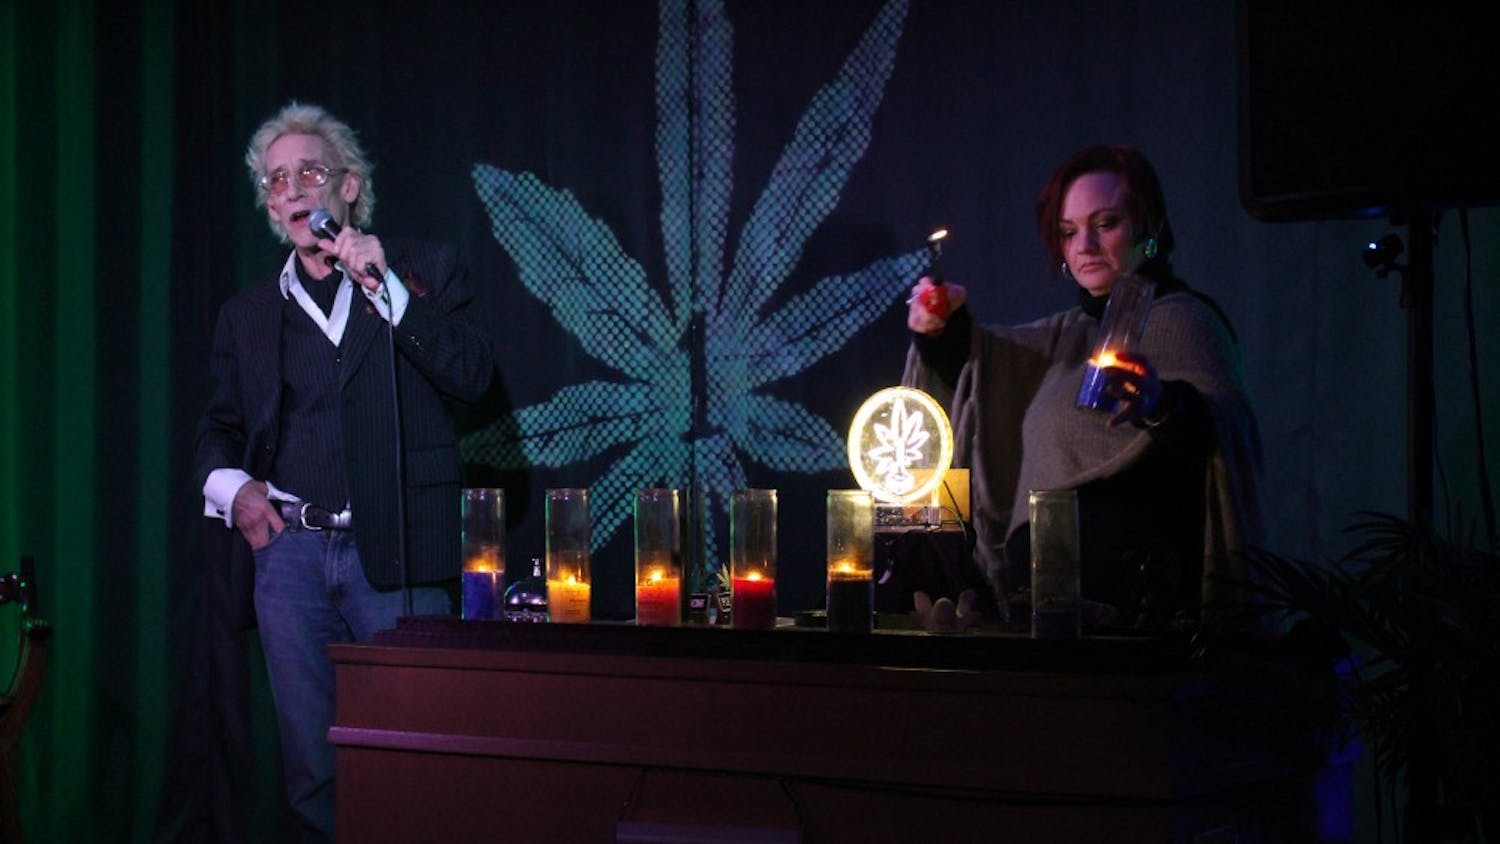 Bill Levin talks about how the candles represent the seven focus areas as a member of the First Church of Cannabis, Roo Gelarden, lights the candles. The candles represent the following: live, love, laugh, create, grow and teach.